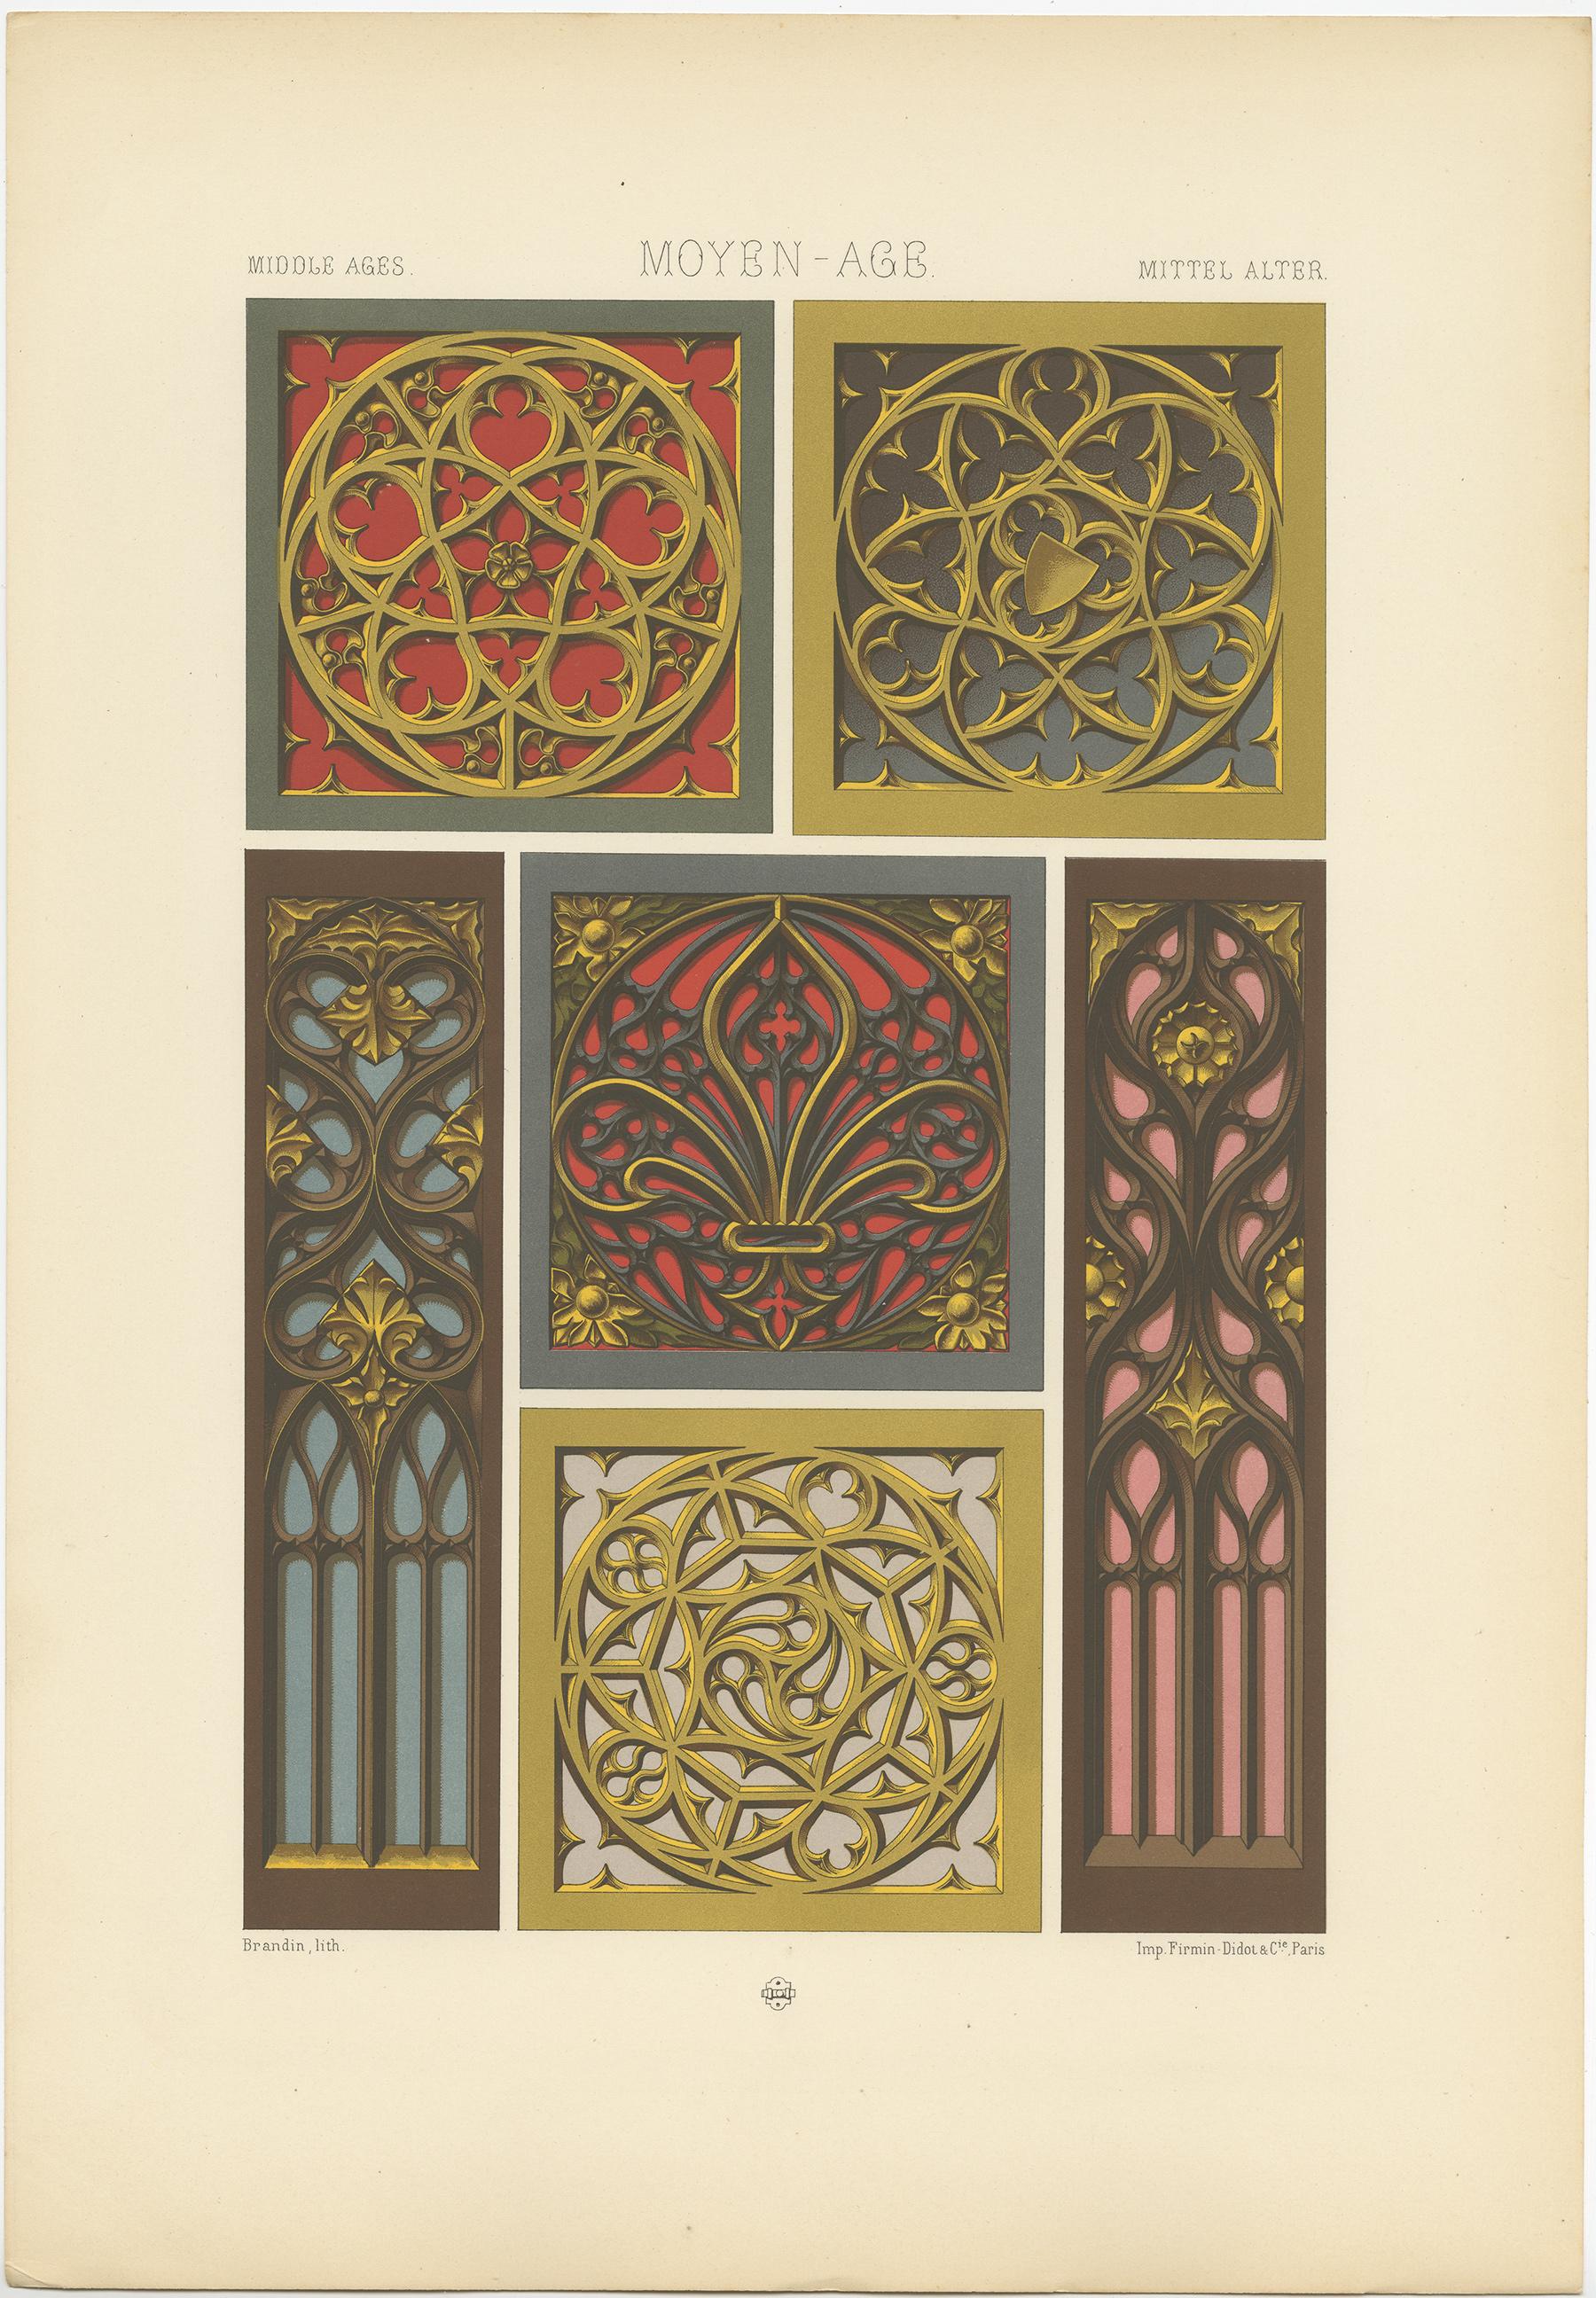 Antique print titled 'Middle Ages - Moyen Age - Mittel Alter'. Chromolithograph of painted and gilt woodwork 15th century ornaments.
This print originates from 'l'Ornement Polychrome' by Auguste Racinet. Published circa 1890.